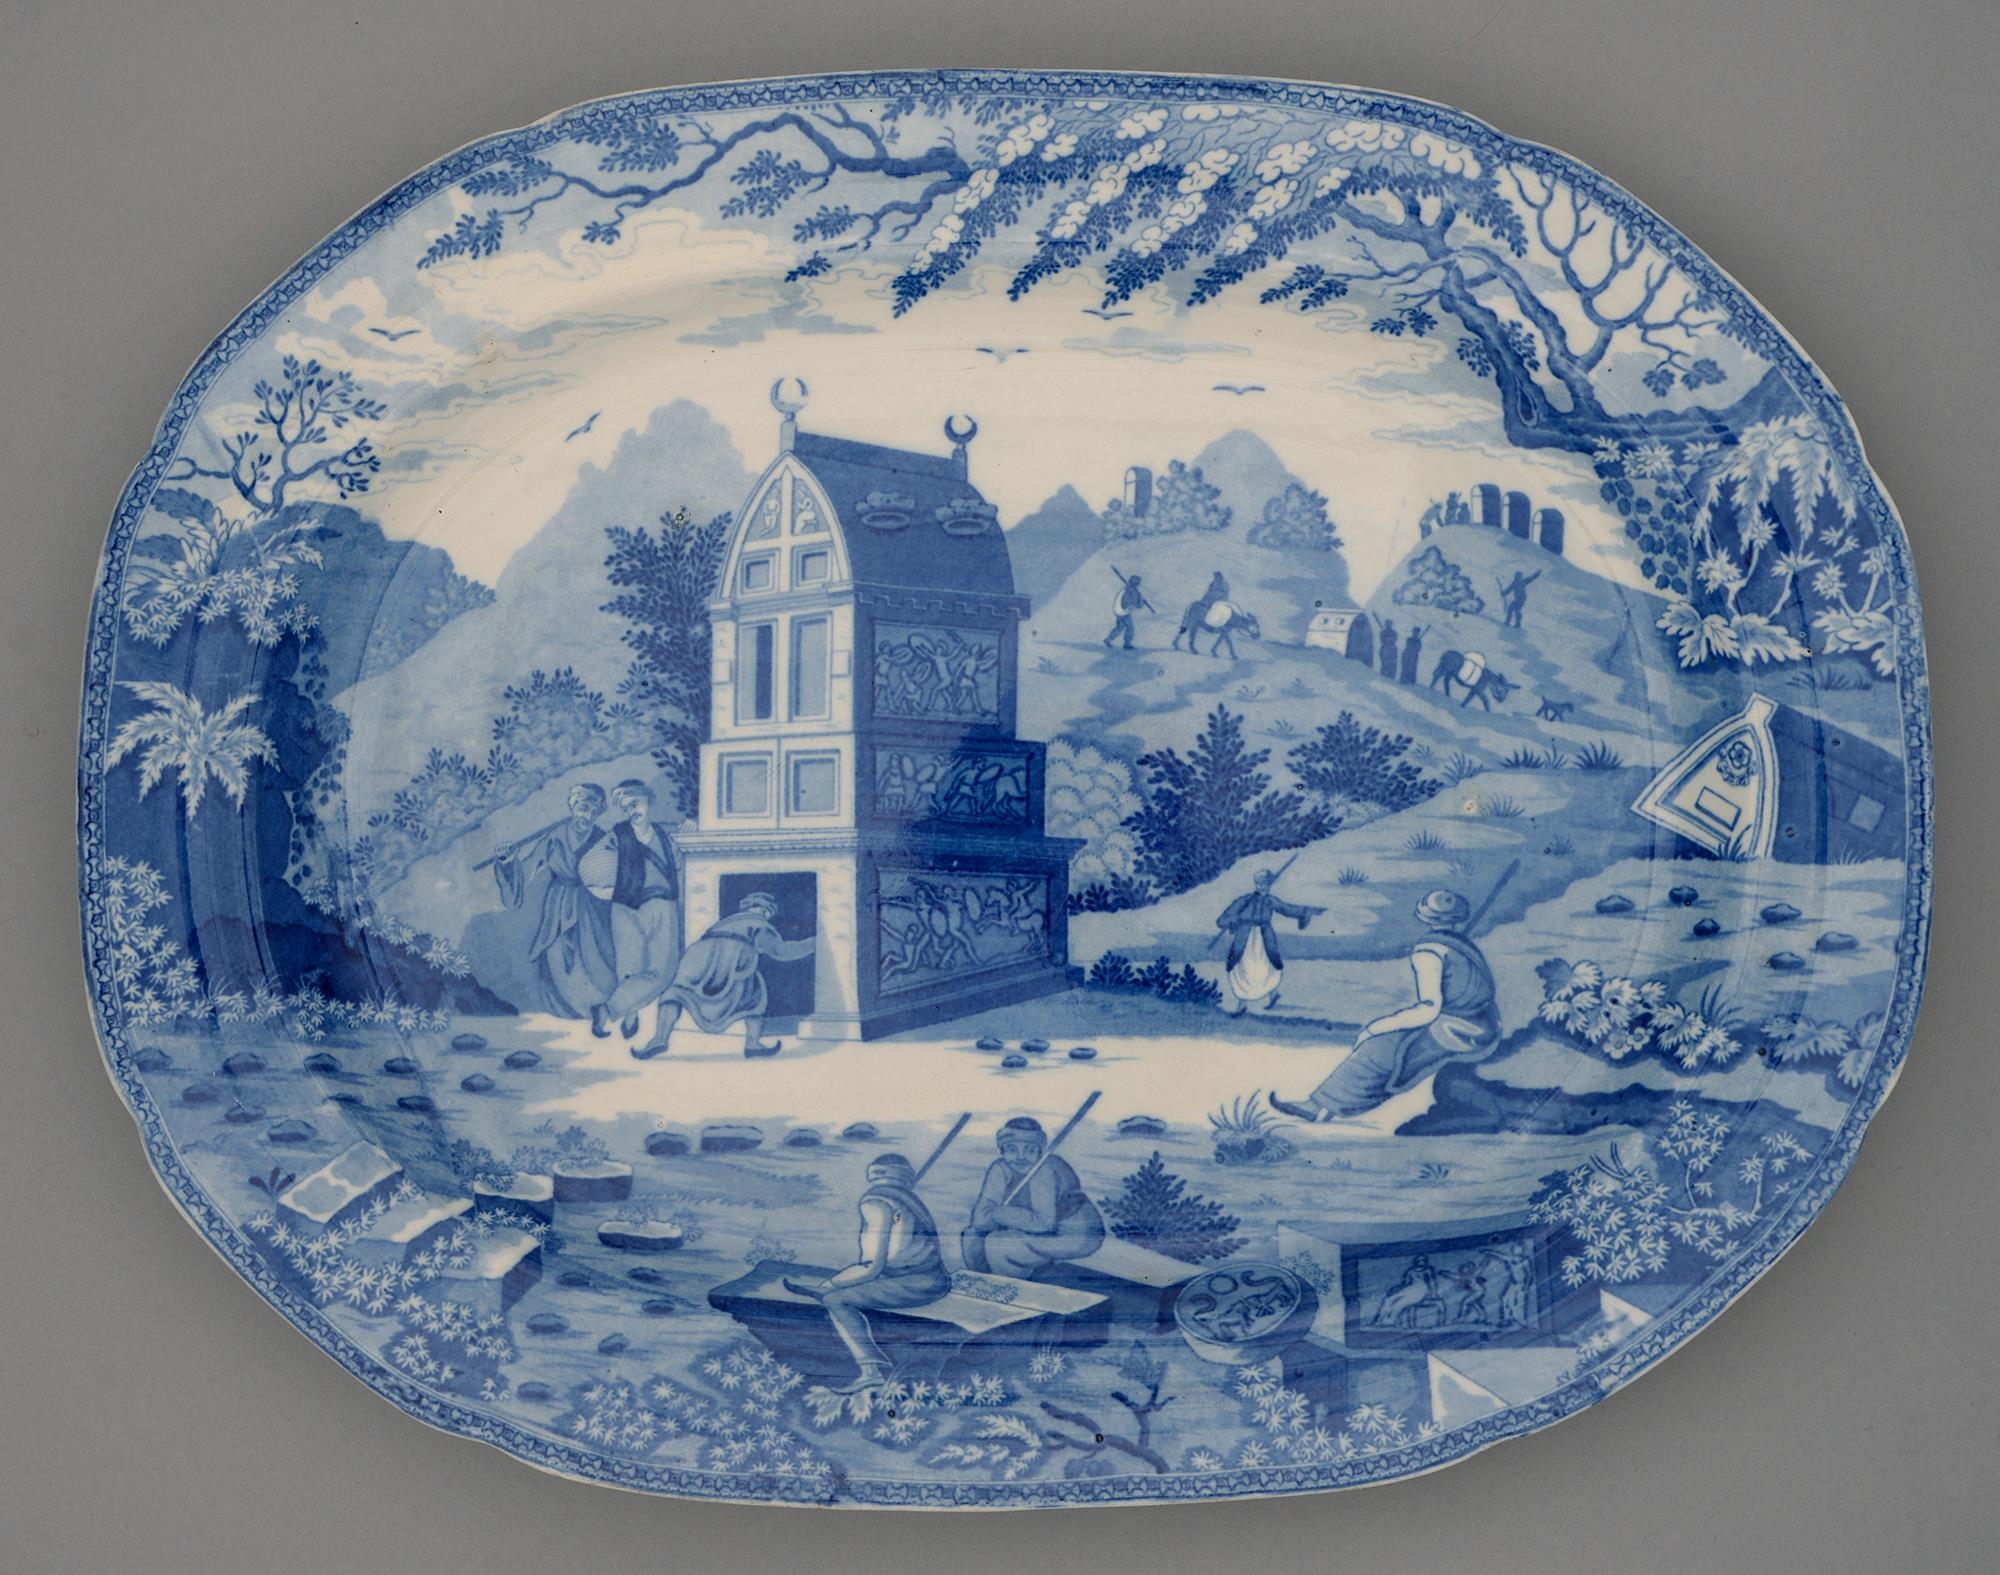 A Spode blue printed earthenware Caramanian Series Colossal Sarcophagus near Castle Rosso pattern